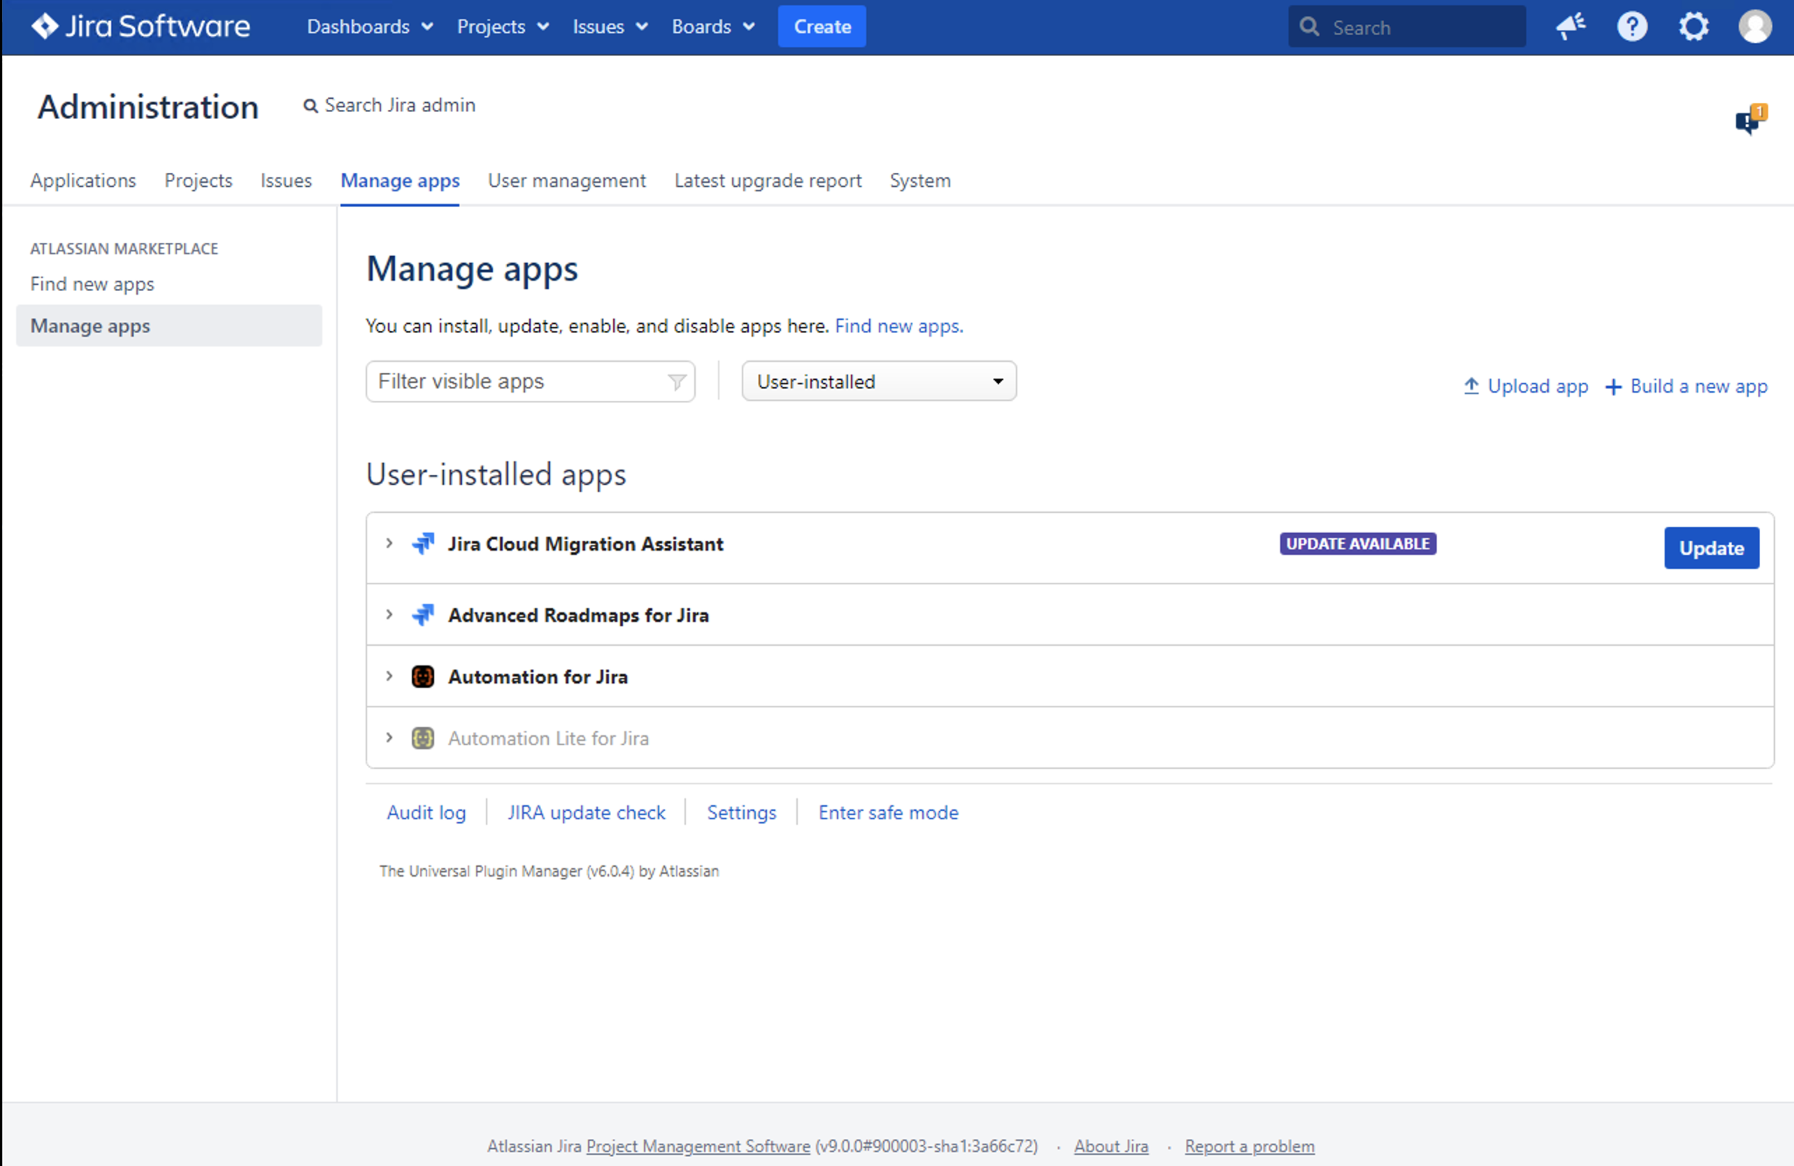 user-installed apps in manage apps